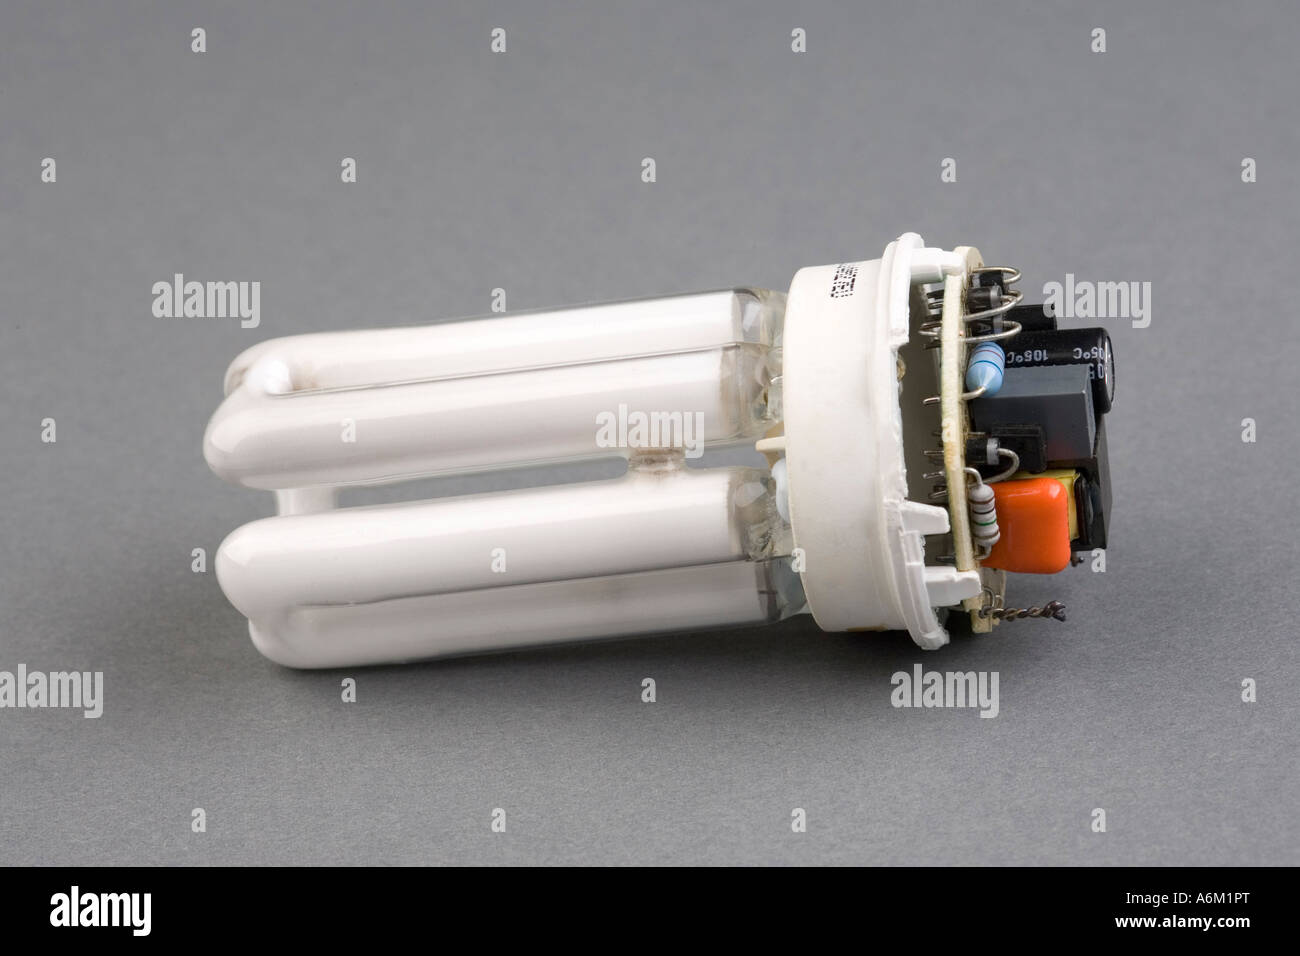 dismantled compact fluorescent lamp showing internal circuit board controller Stock Photo